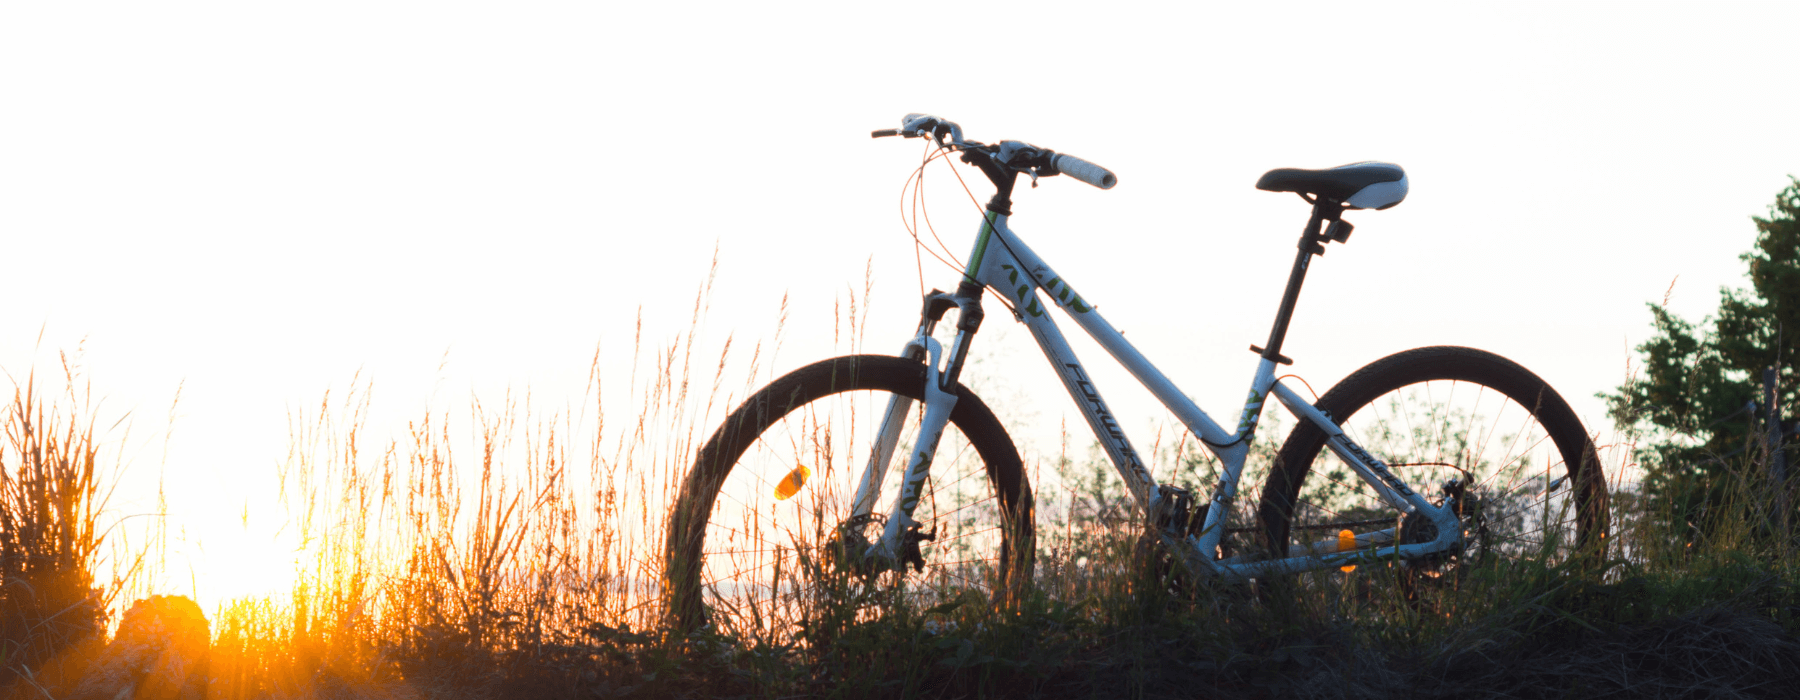  A bicycle silhouetted against the setting sun, parked on a grassy field with tall grasses in the foreground.